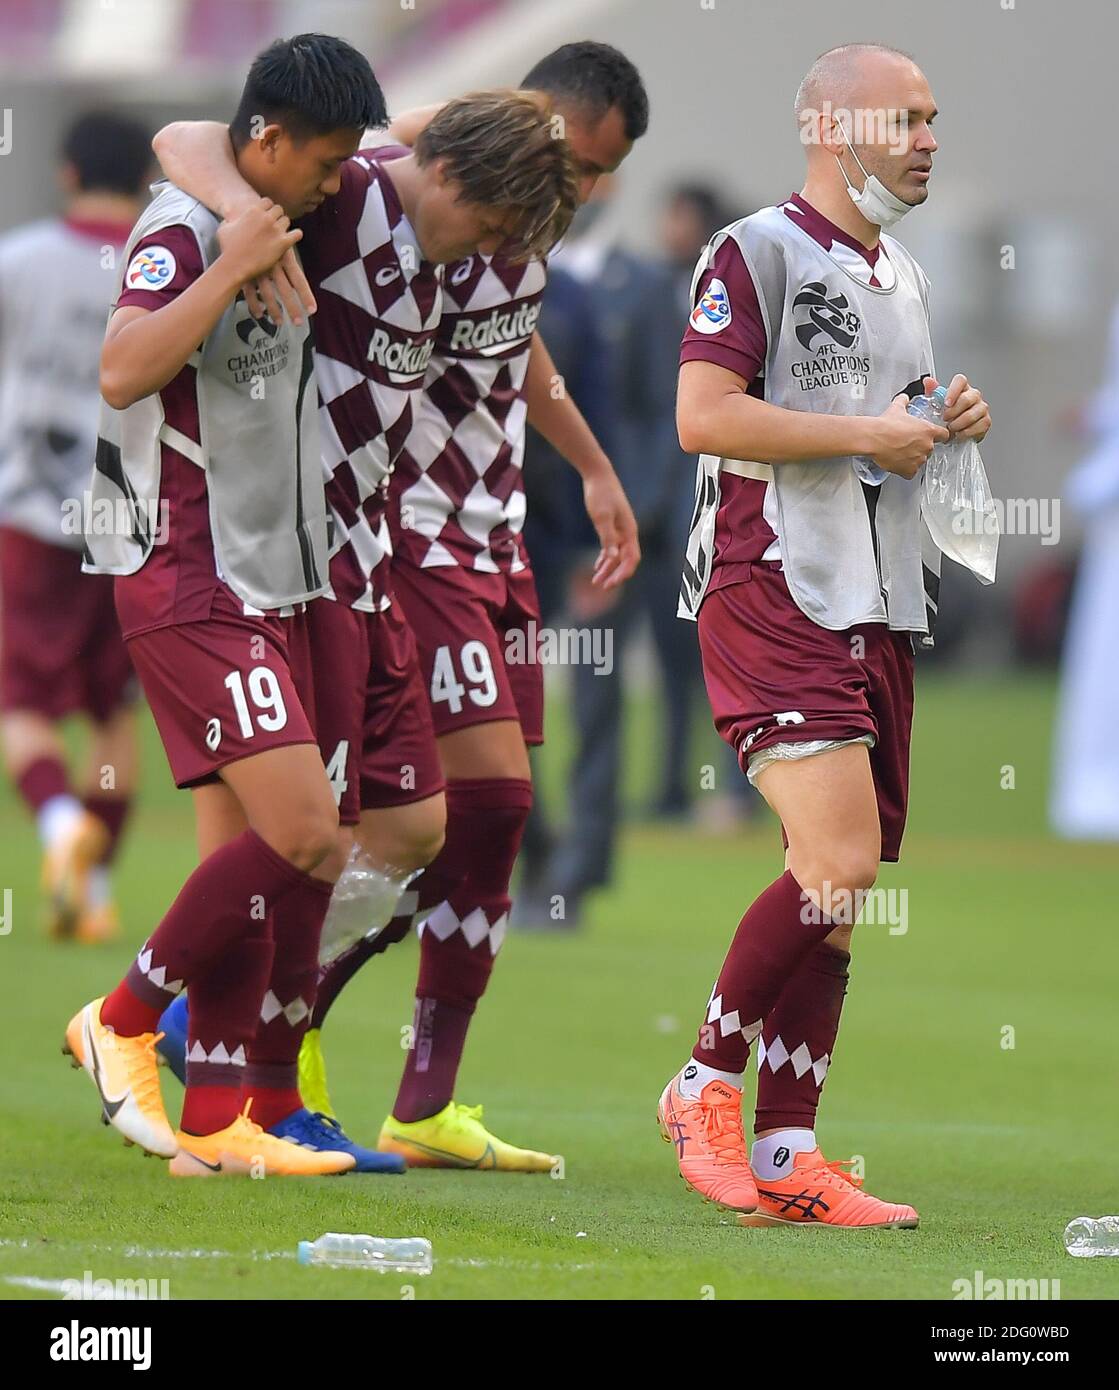 Doha, Qatar. 7th Dec, 2020. Andres Iniesta (R) of Vissel Kobe reacts after the round 16 match of the AFC Champions League between Shanghai SIPG FC of China and Vissel Kobe of Japan in Doha, Qatar, Dec. 7, 2020. Credit: Nikku/Xinhua/Alamy Live News Stock Photo